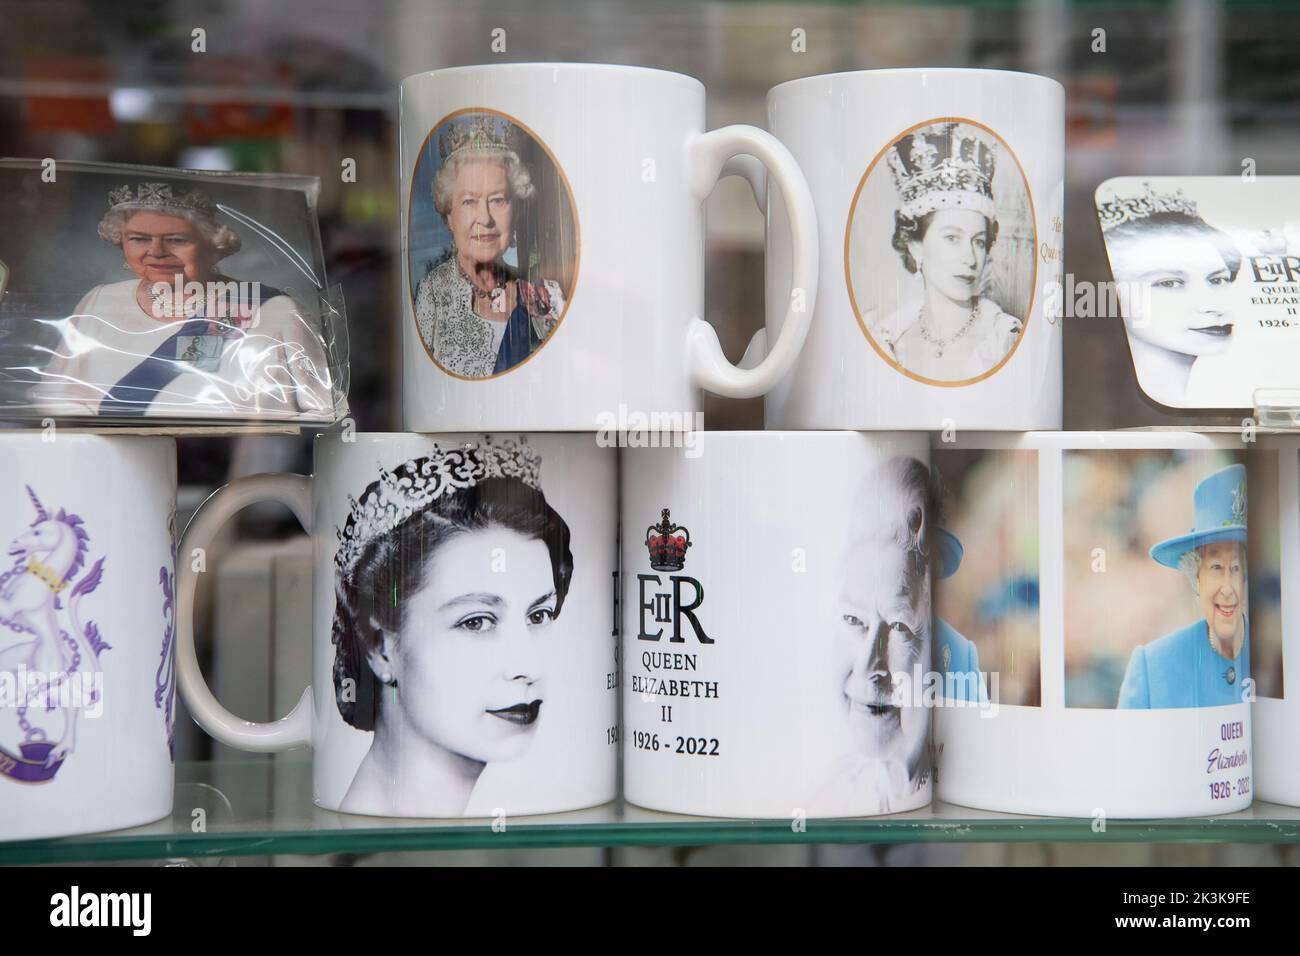 Windsor, Berkshire, UK. 27th September, 2022. Memorabilia marking the passing of Queen Elizabeth II for sale in a tourist shop in Windsor. Following the sad passing of Her Majesty the Queen, the Royal Mourning Period has now ended. After thousands of mourners flooded into Windsor to lay flowers, Windsor was much quieter today. Credit: Maureen McLean/Alamy Live News Stock Photo